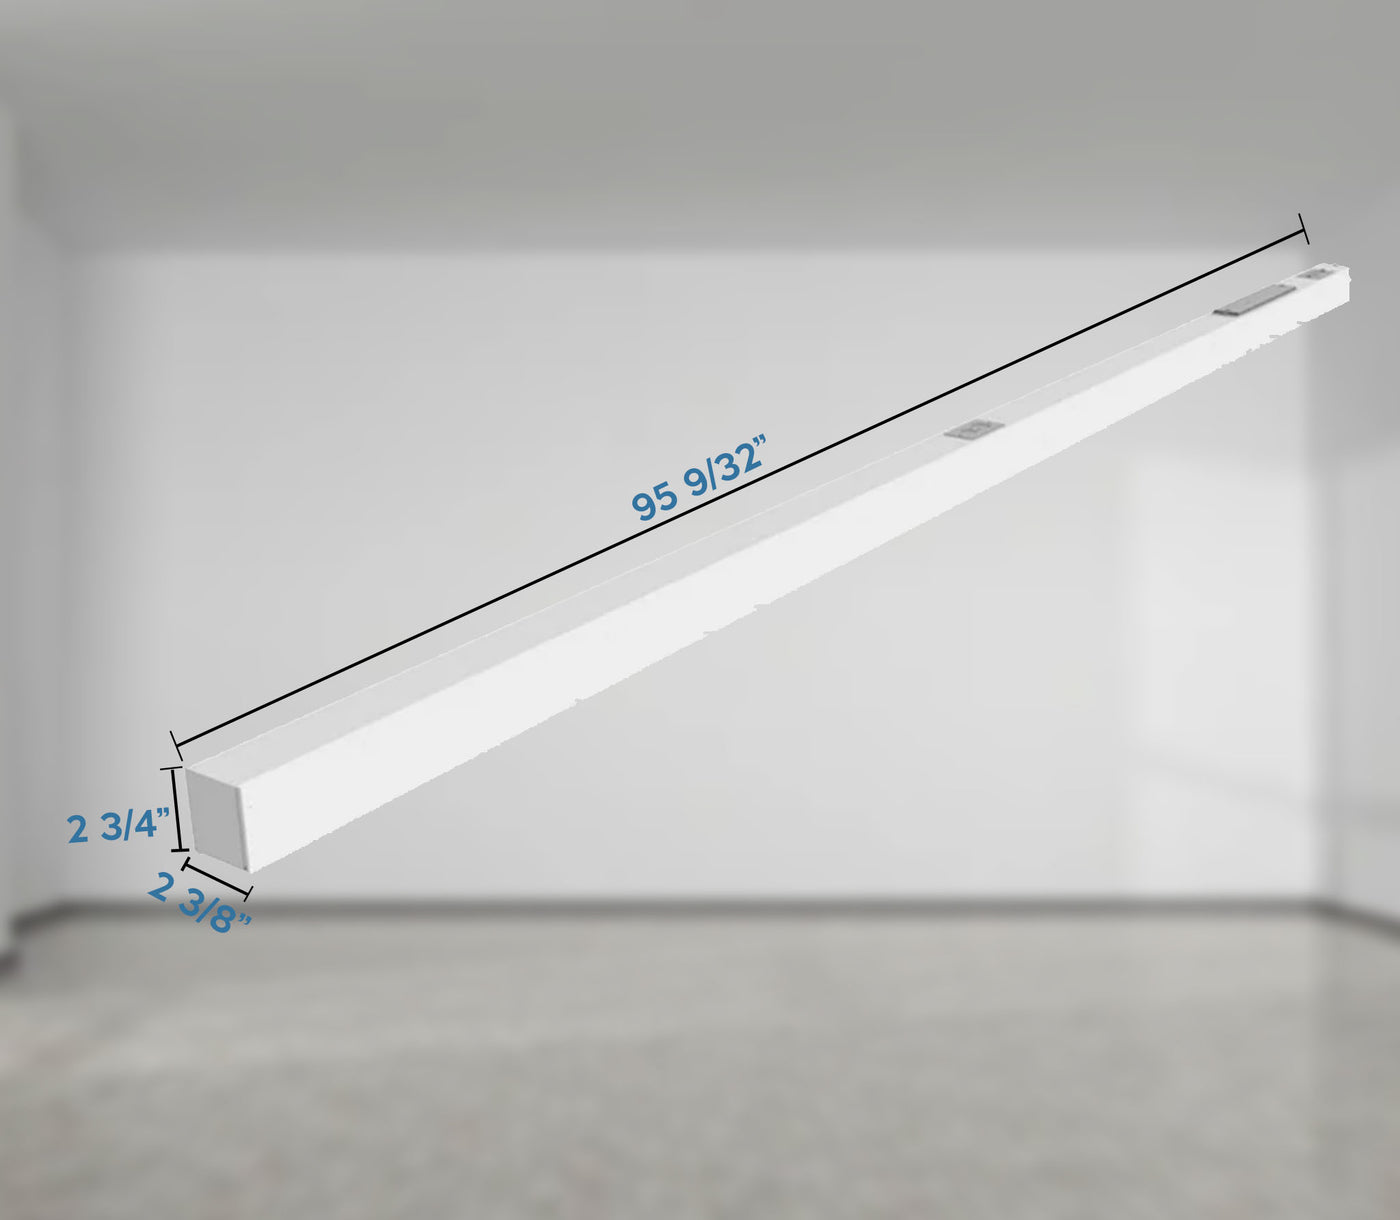 8 FT Linear Suspended LED Beam, 9200 Lumen Max, 80W, CCT Selectable, 0-10V Dimmable, 120-277V, Transparent Frosted Housing, Power Feed Cable Included